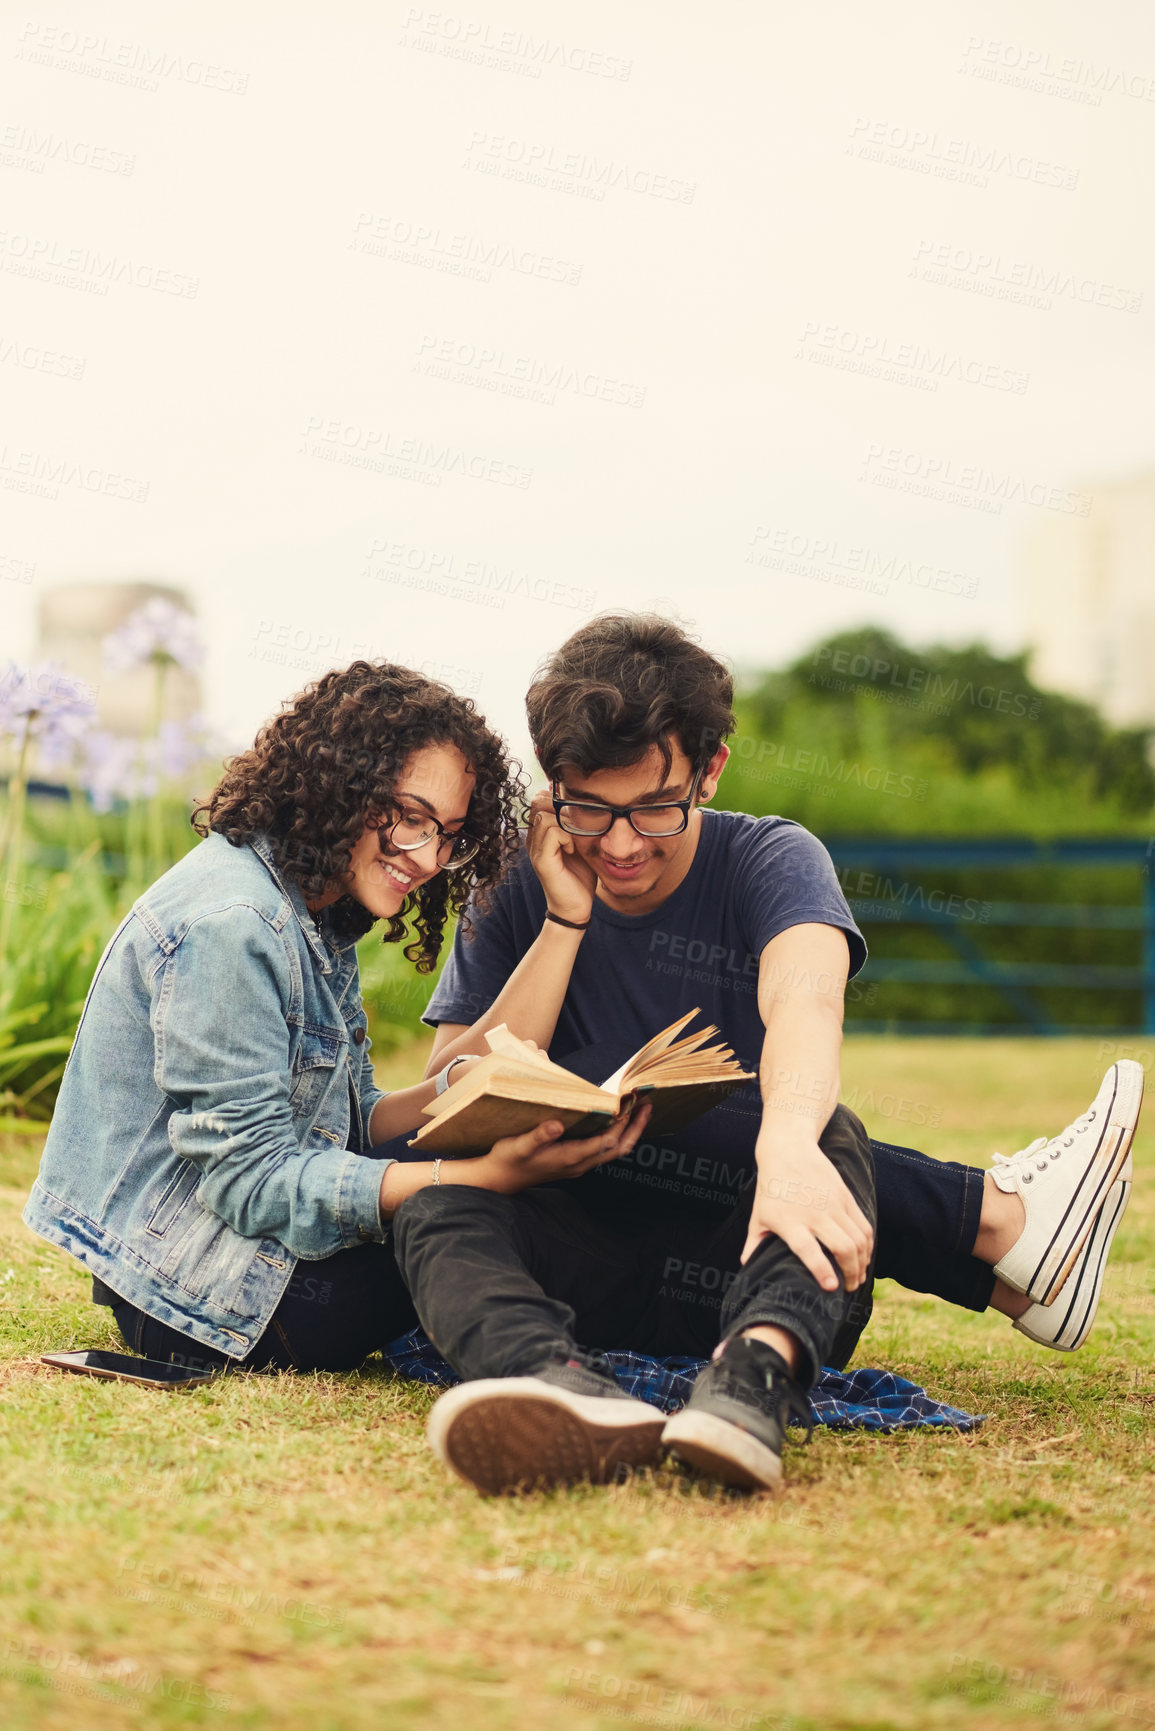 Buy stock photo Shot of a teenage couple reading a book together outdoors